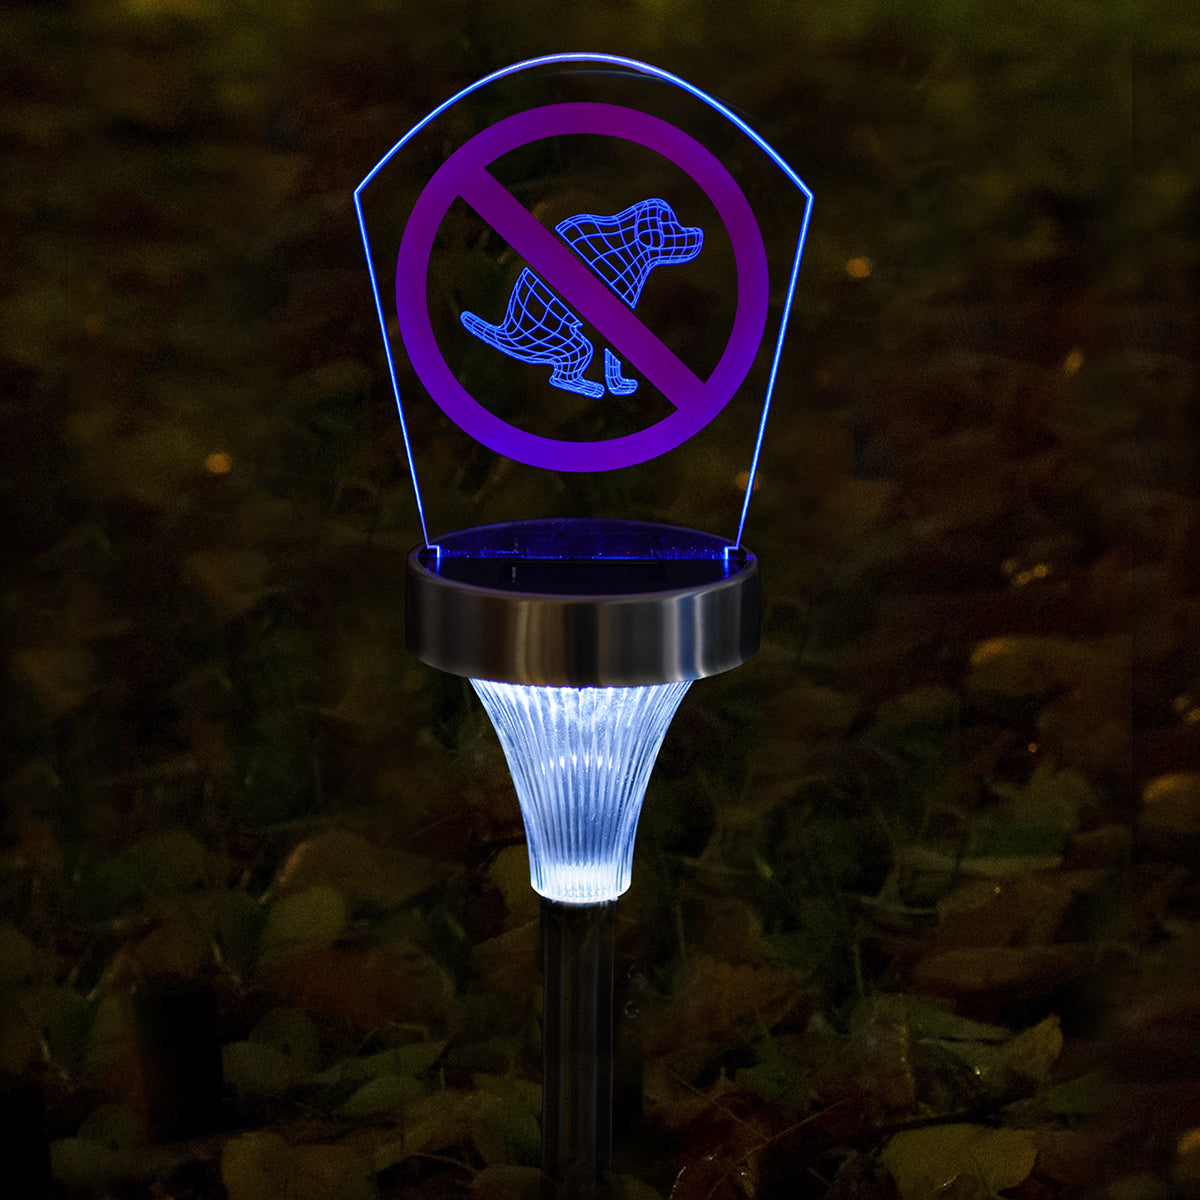 "No Pooping Allowed" 2in1 Solar Plaque Light